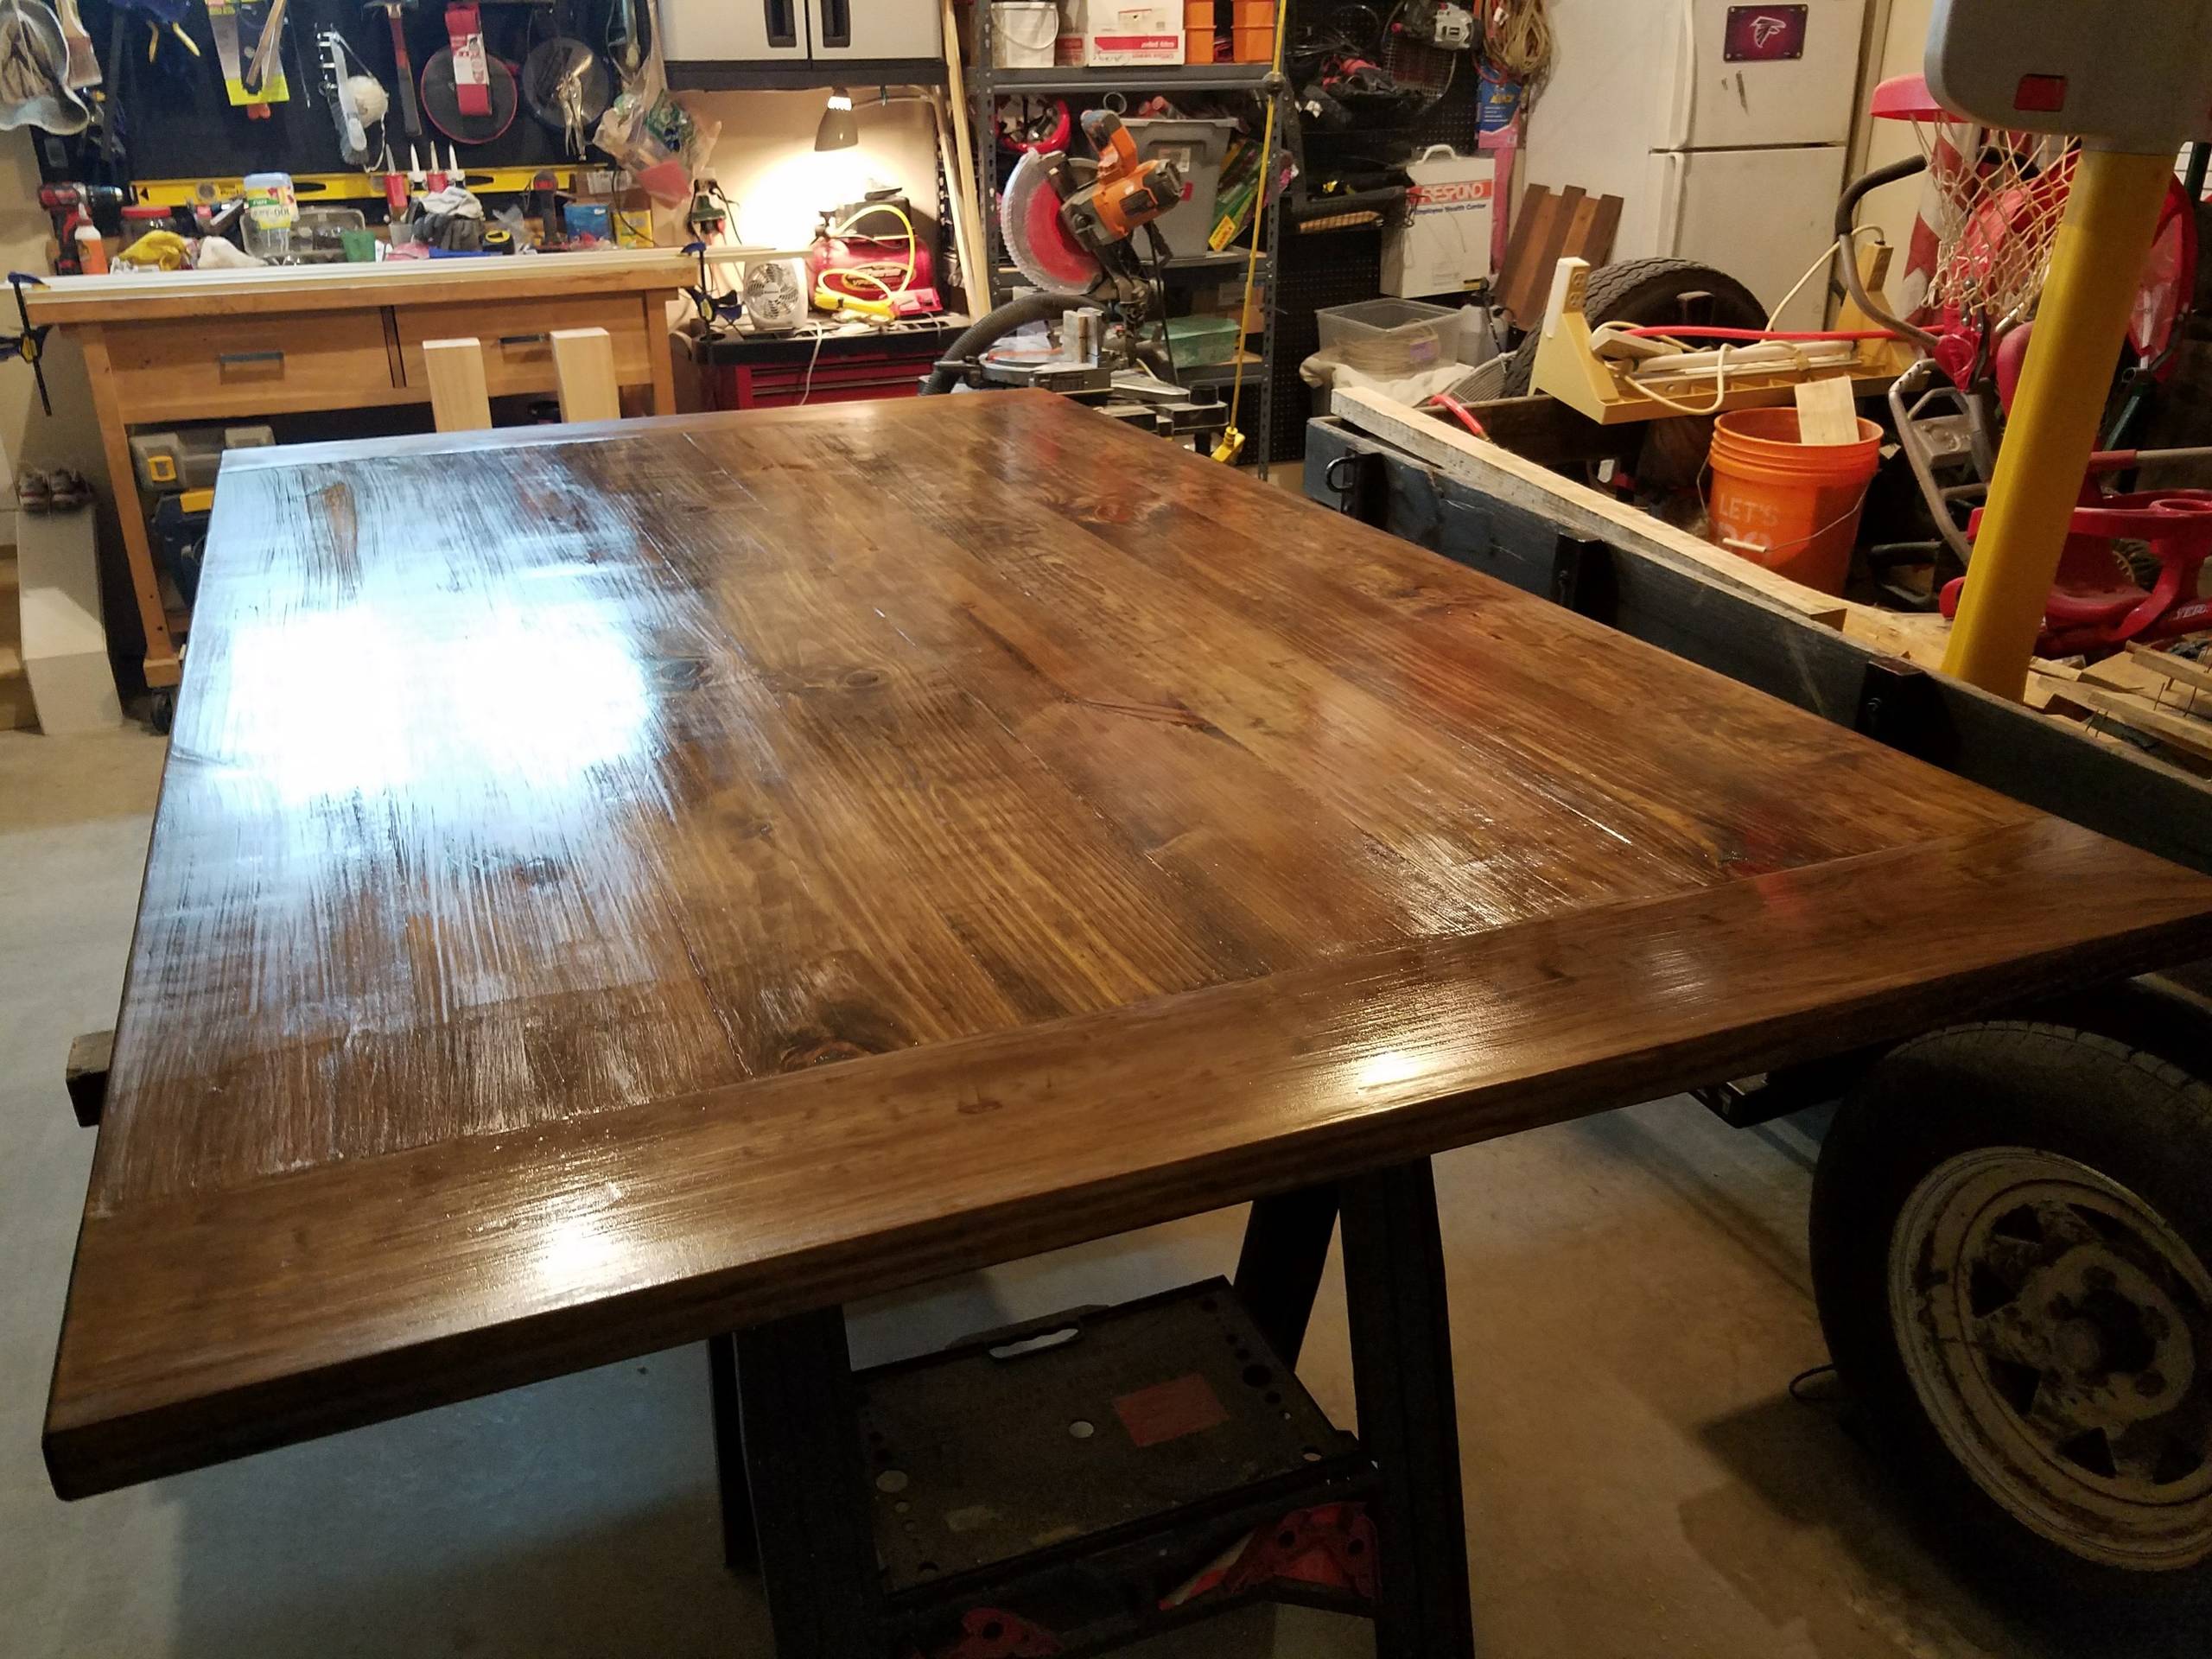 Table build and installation